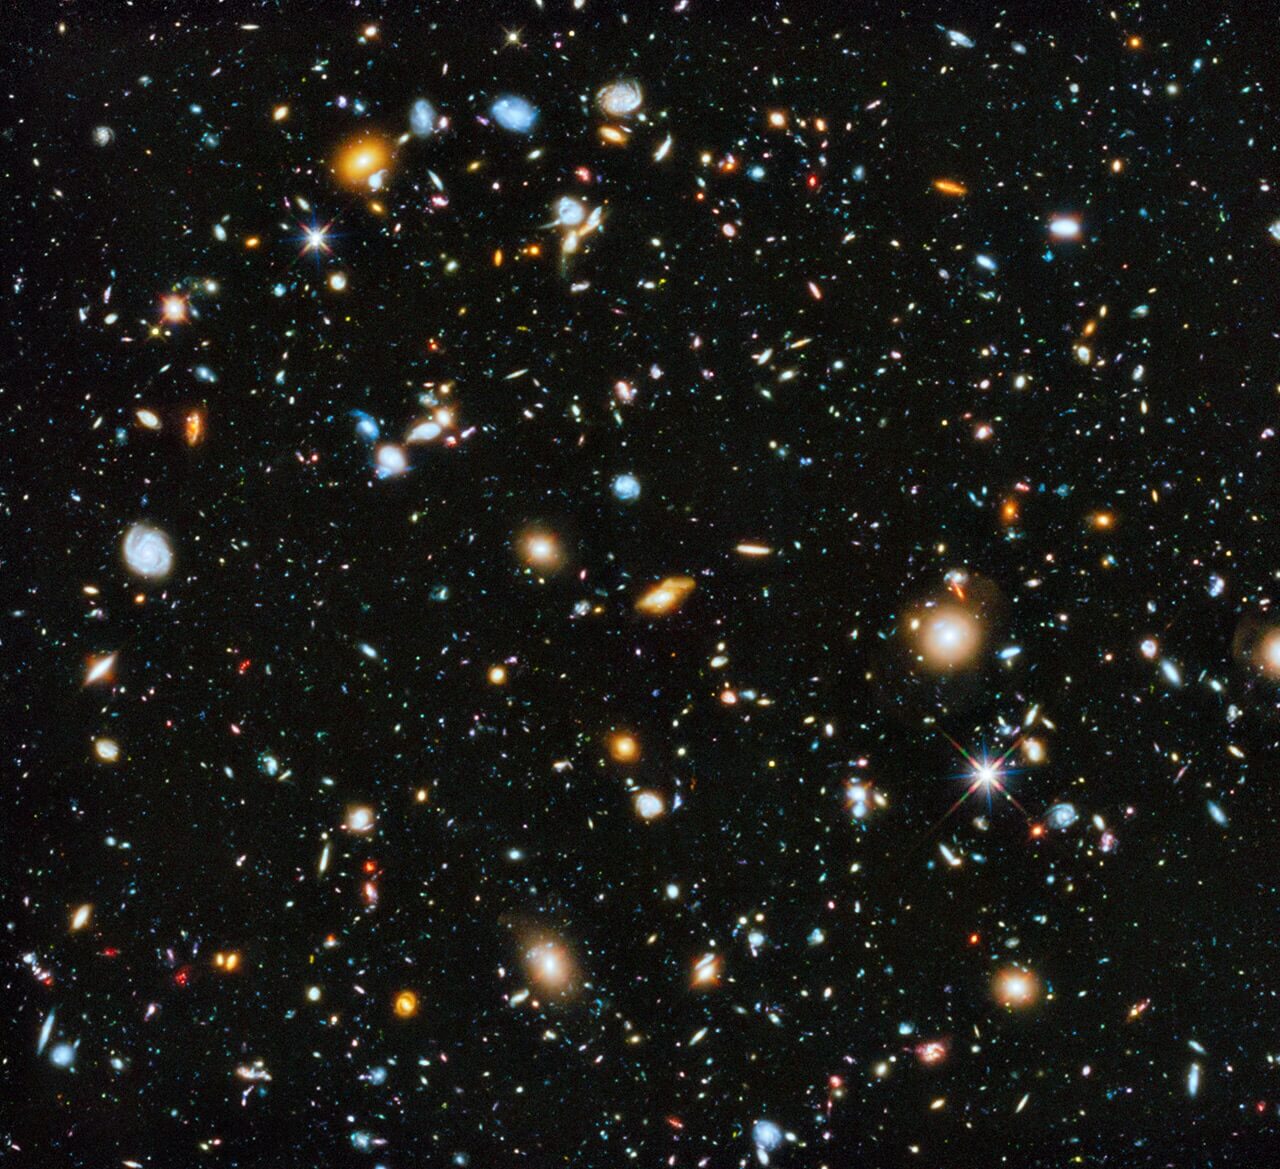 What is between the galaxies?